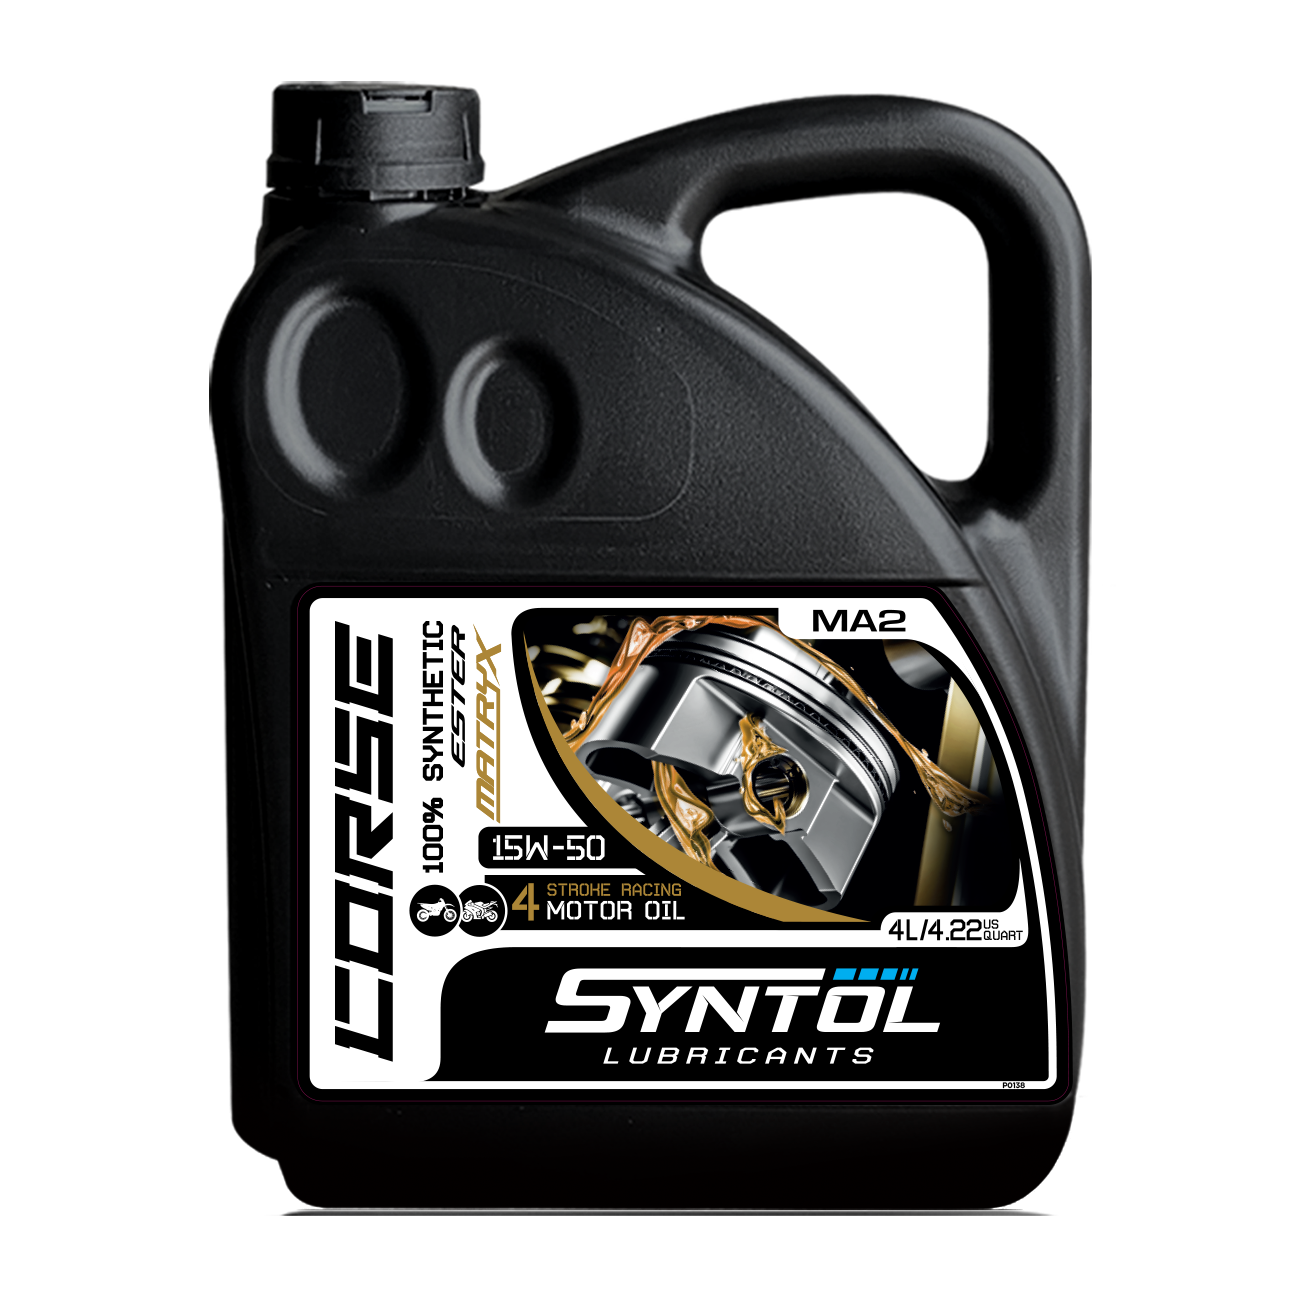 Syntol Corse 4T 15W-50 Motorcycle Engine Oil - 4 Litre-F0082-4-Oils and Lubricants-Pyramid Motorcycle Accessories